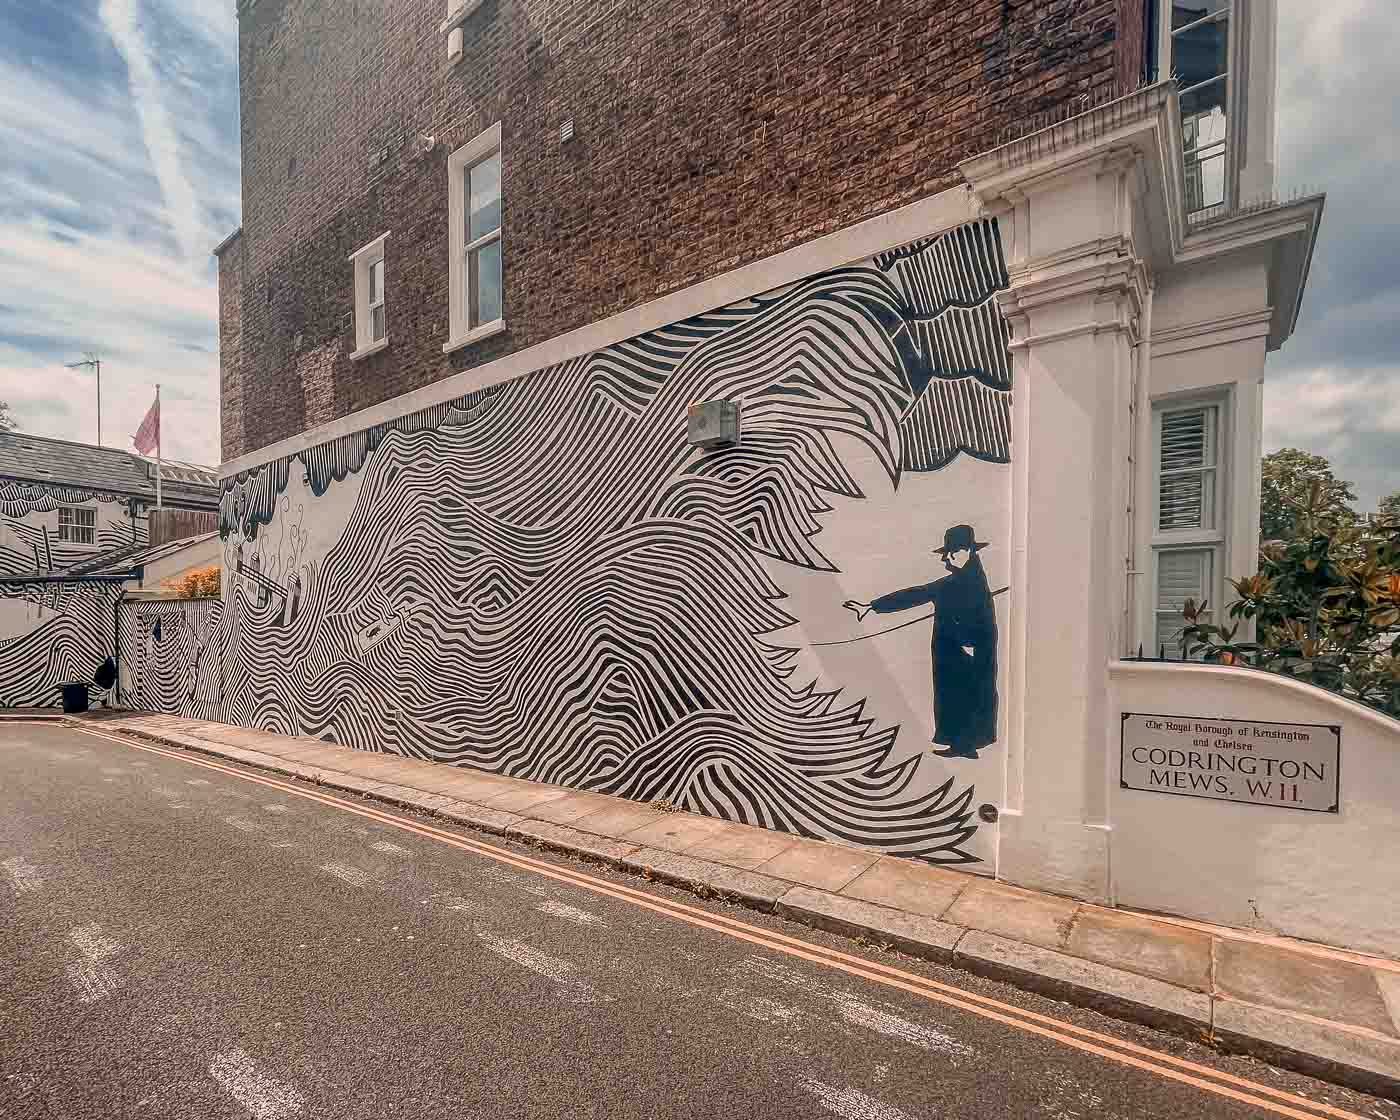 Tucked away close to the Ladbroke Grove Underground station, between the bookshop from the movie Notting Hill and Rough Trade West, you'll discover a hidden gem: a mural of the album art from Yorke's 2006 solo album, "The Eraser." If you're a fan of Thom Yorke's solo work or Radiohead's iconic sound, a trip to West London should be on your travel list.